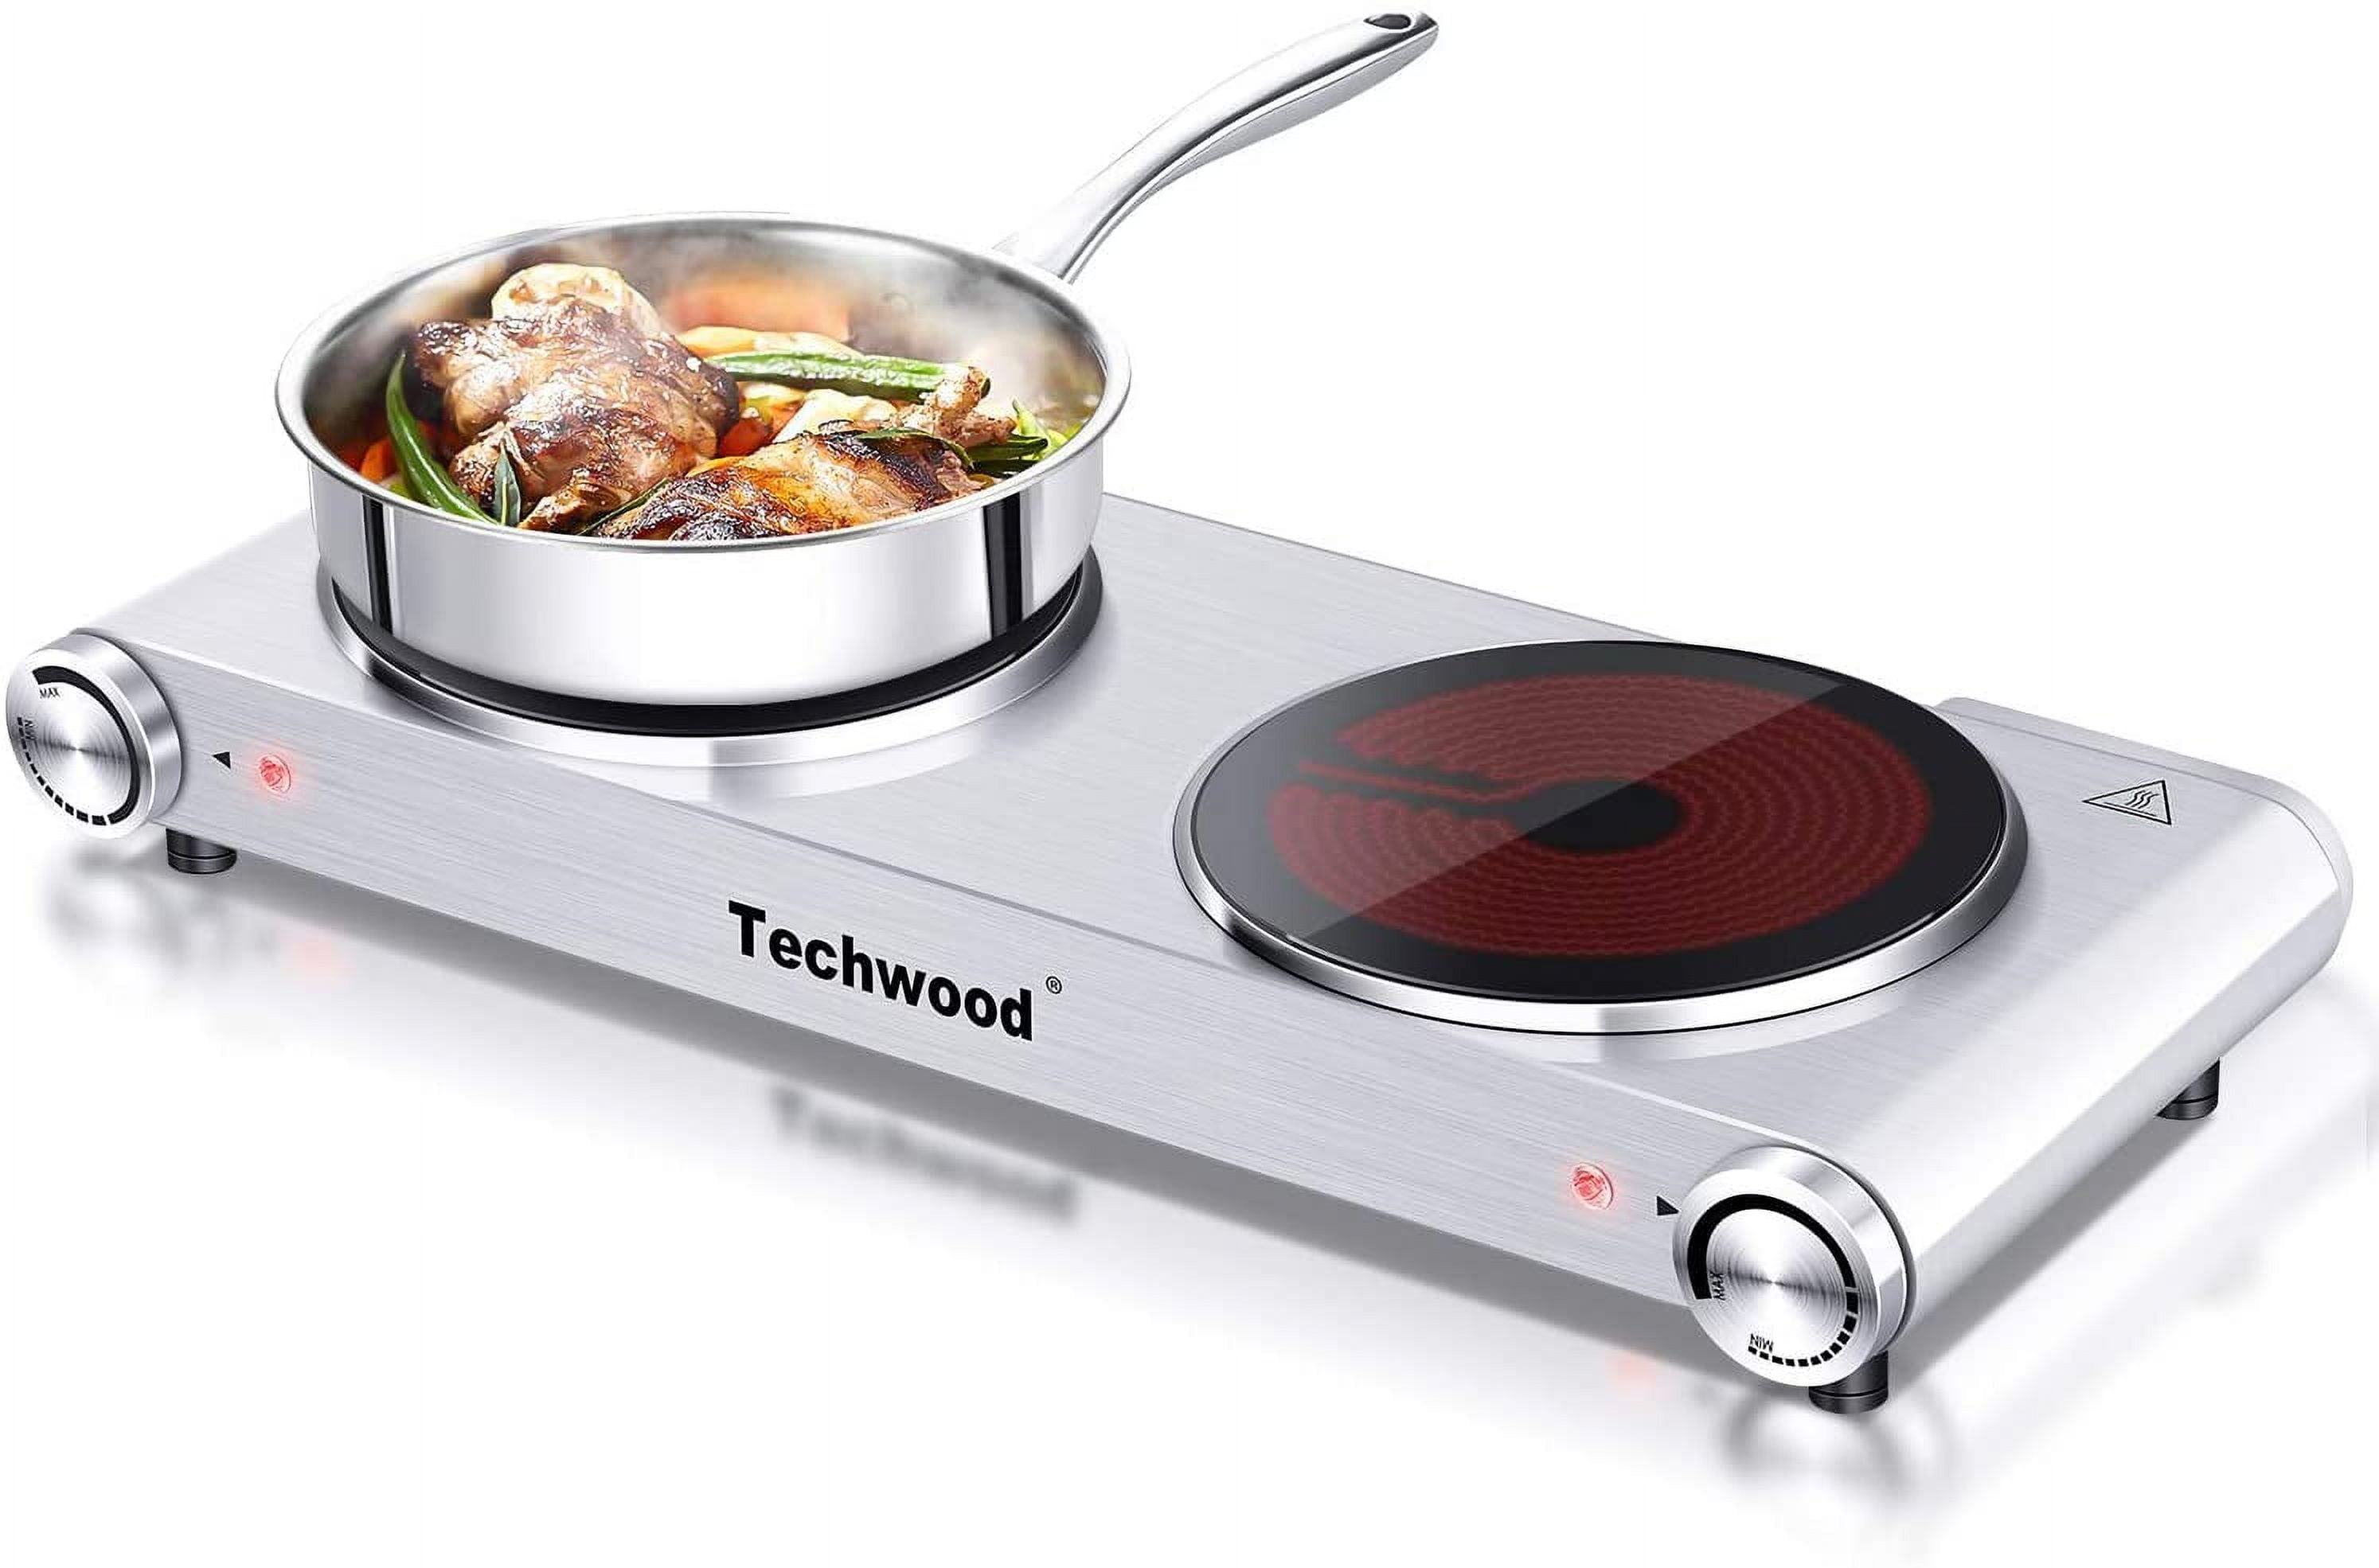 Techwood 1800W Electric Hot Plate, Countertop Stove Double Burner for  Cooking, Infrared Ceramic Hot Plates Double Cooktop, Silver, Brushed  Stainless Steel Easy To Clean Upgraded Version 